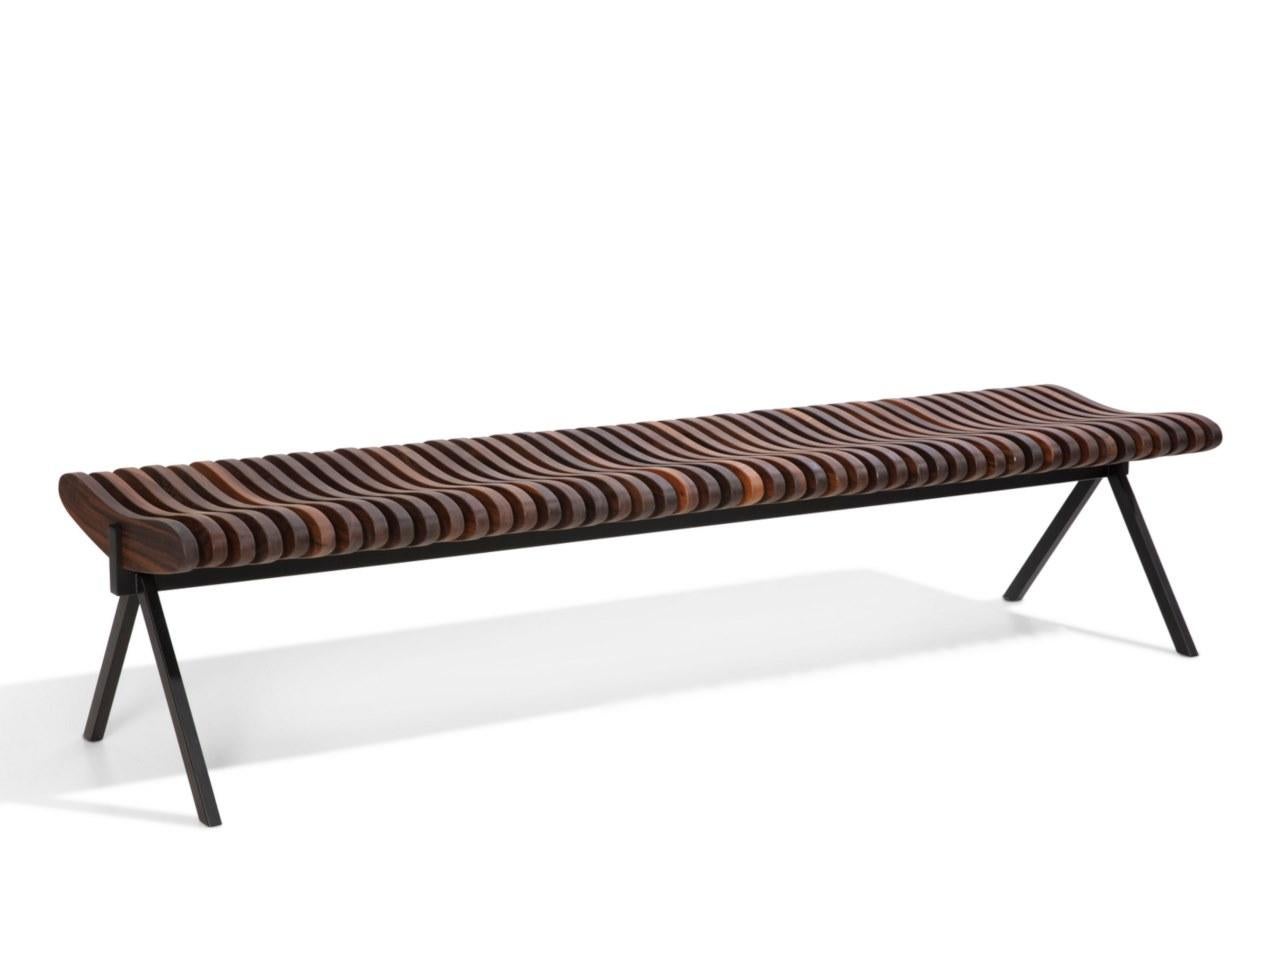 Perlude walnut natural medium by Caroline Voet
Dimensions: 50 x 150 x H 43 cm
Materials: Walnut natural
Also available in oak natural, seating oak black, seating teak (outdoor).

The PRELUDE benches are assembled from top grade FSC-labelled